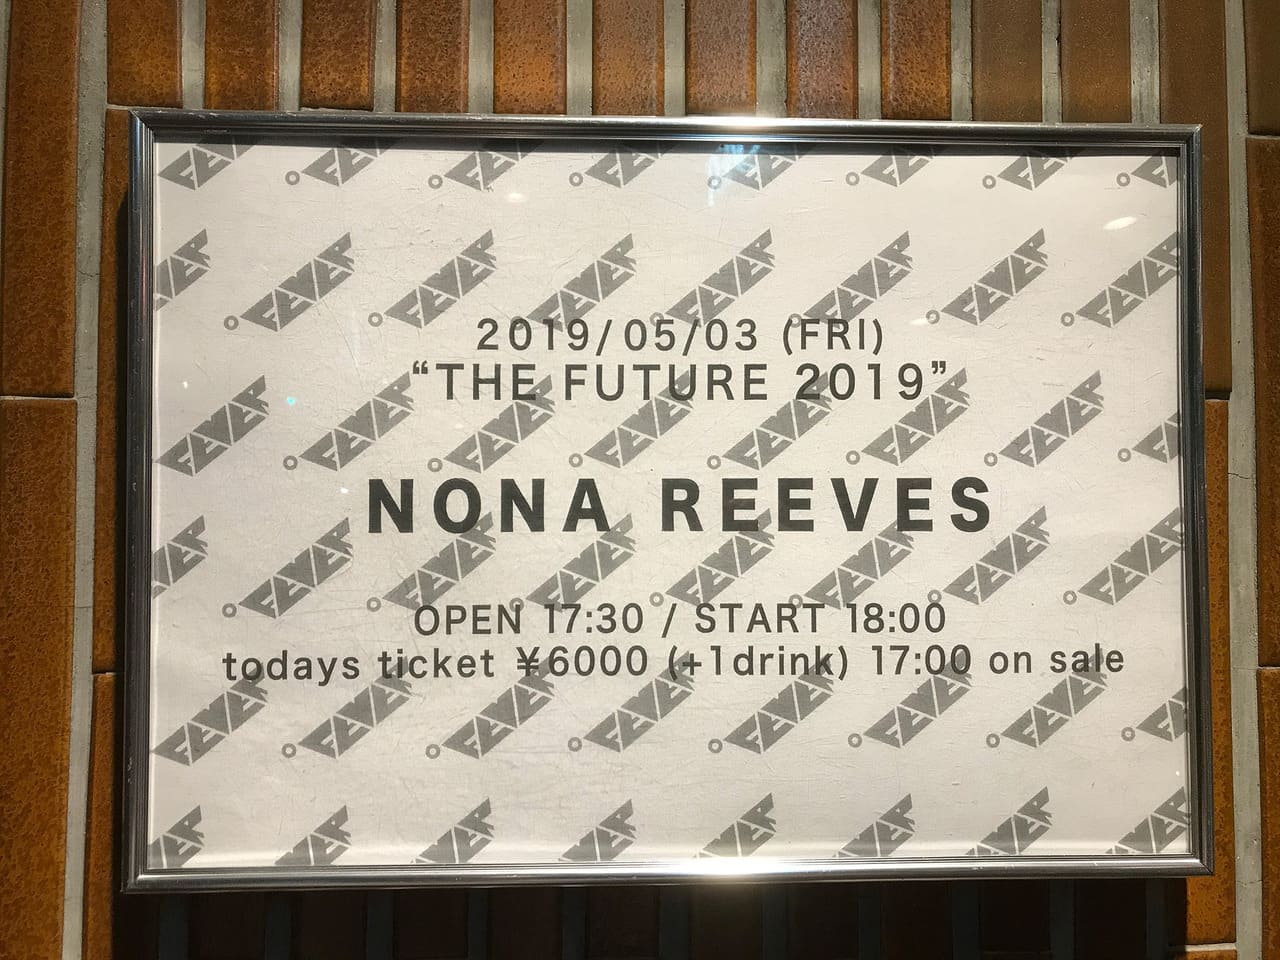 NONA REEVES THE FUTURE 2019